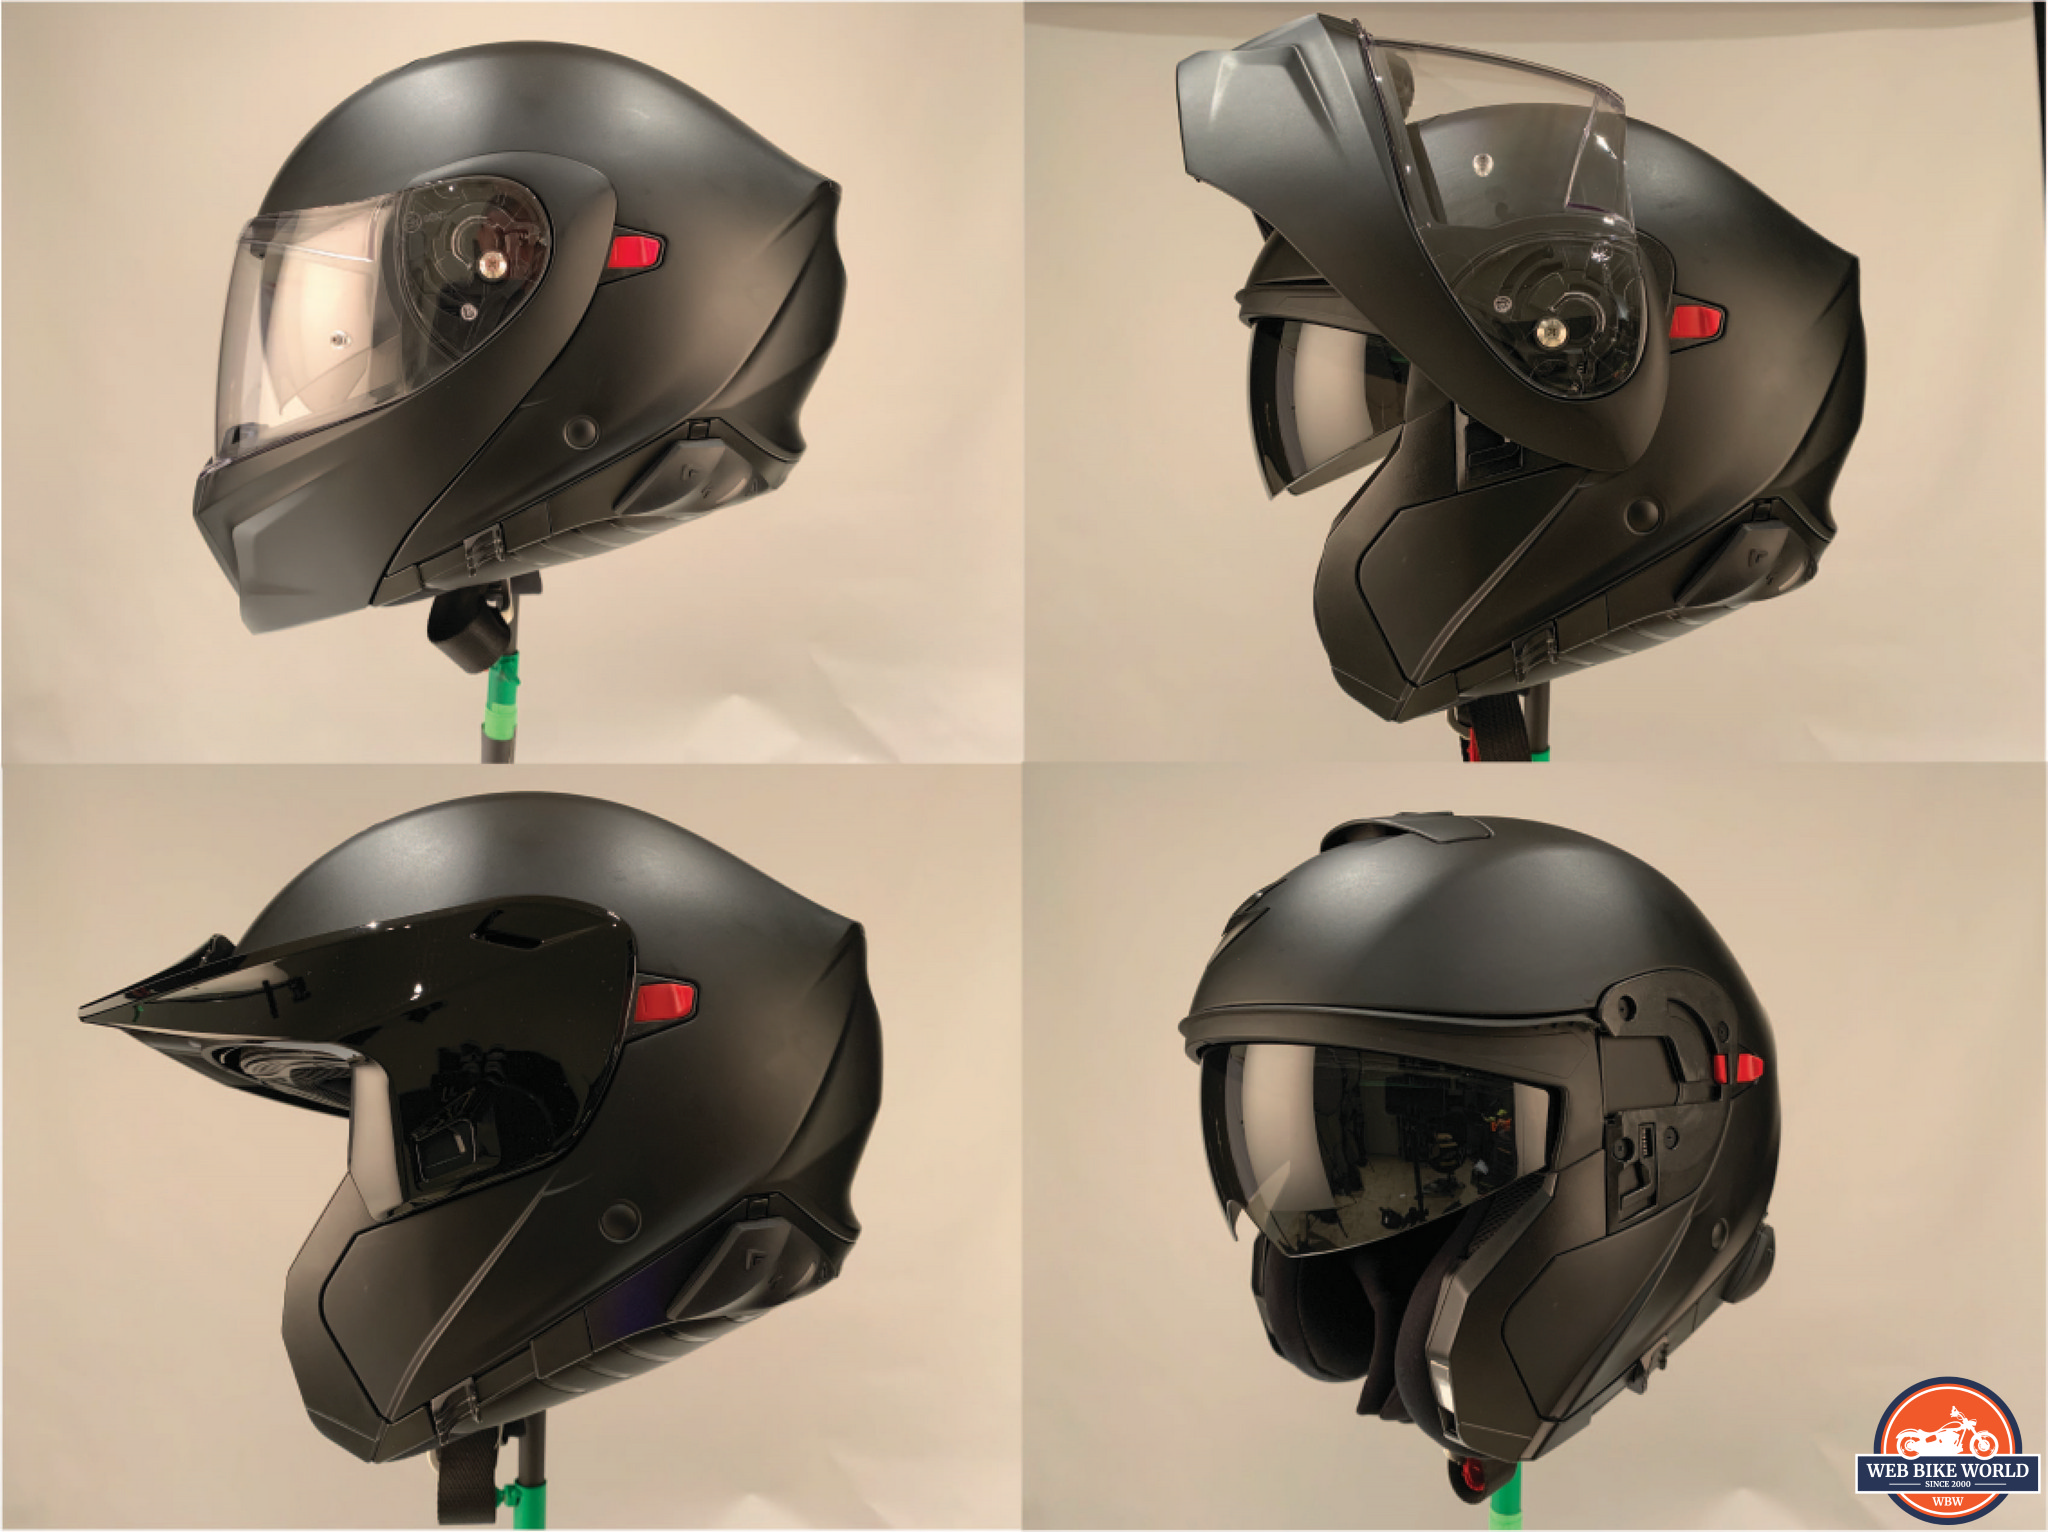 Various configurations of the EXO GT930 helmet